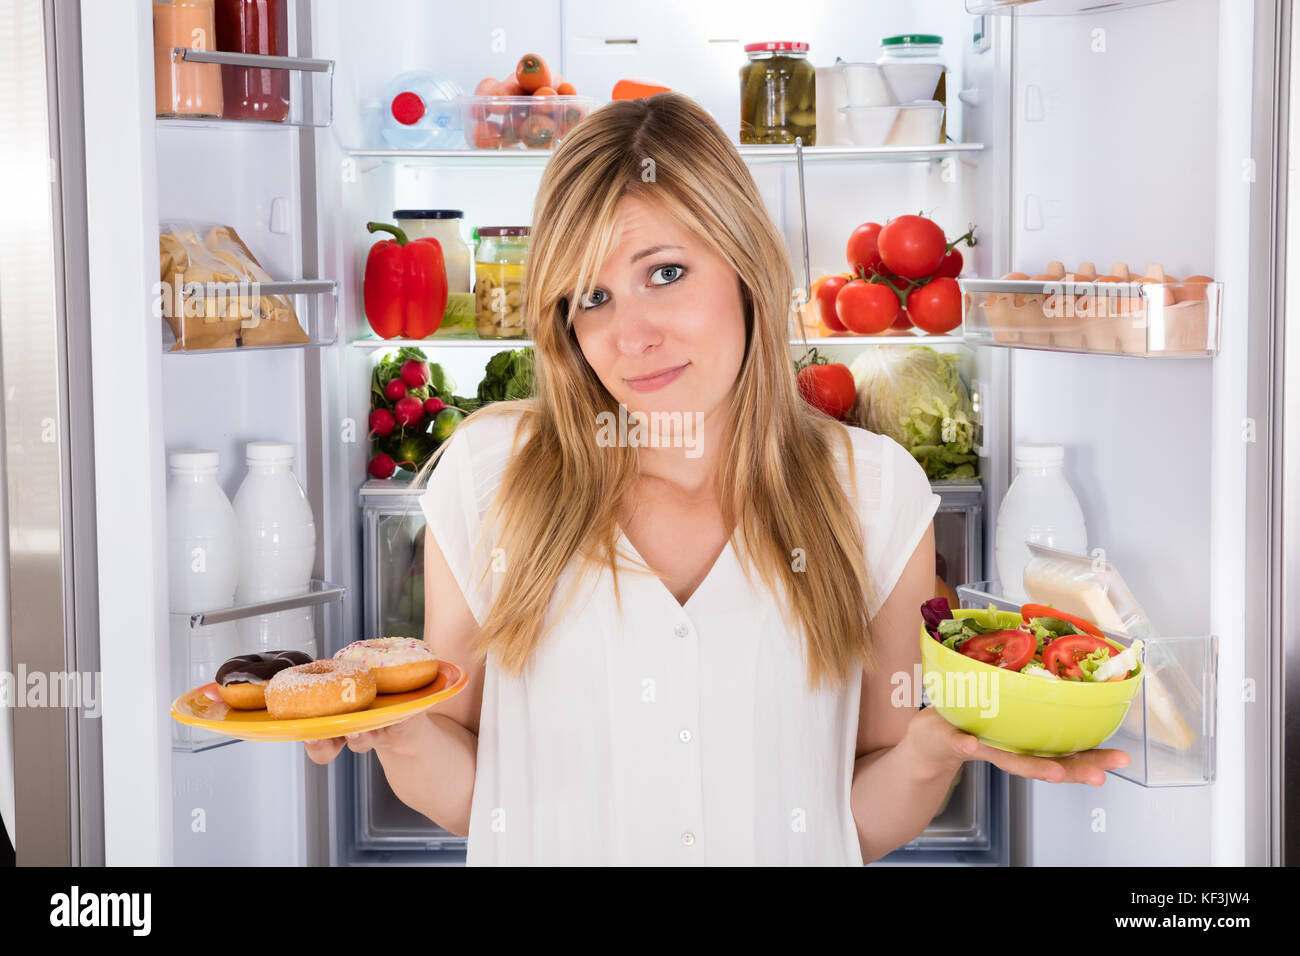 Confused Young Woman Holding Salad And Plate Of Donut Near Refrigerator Stock Photo